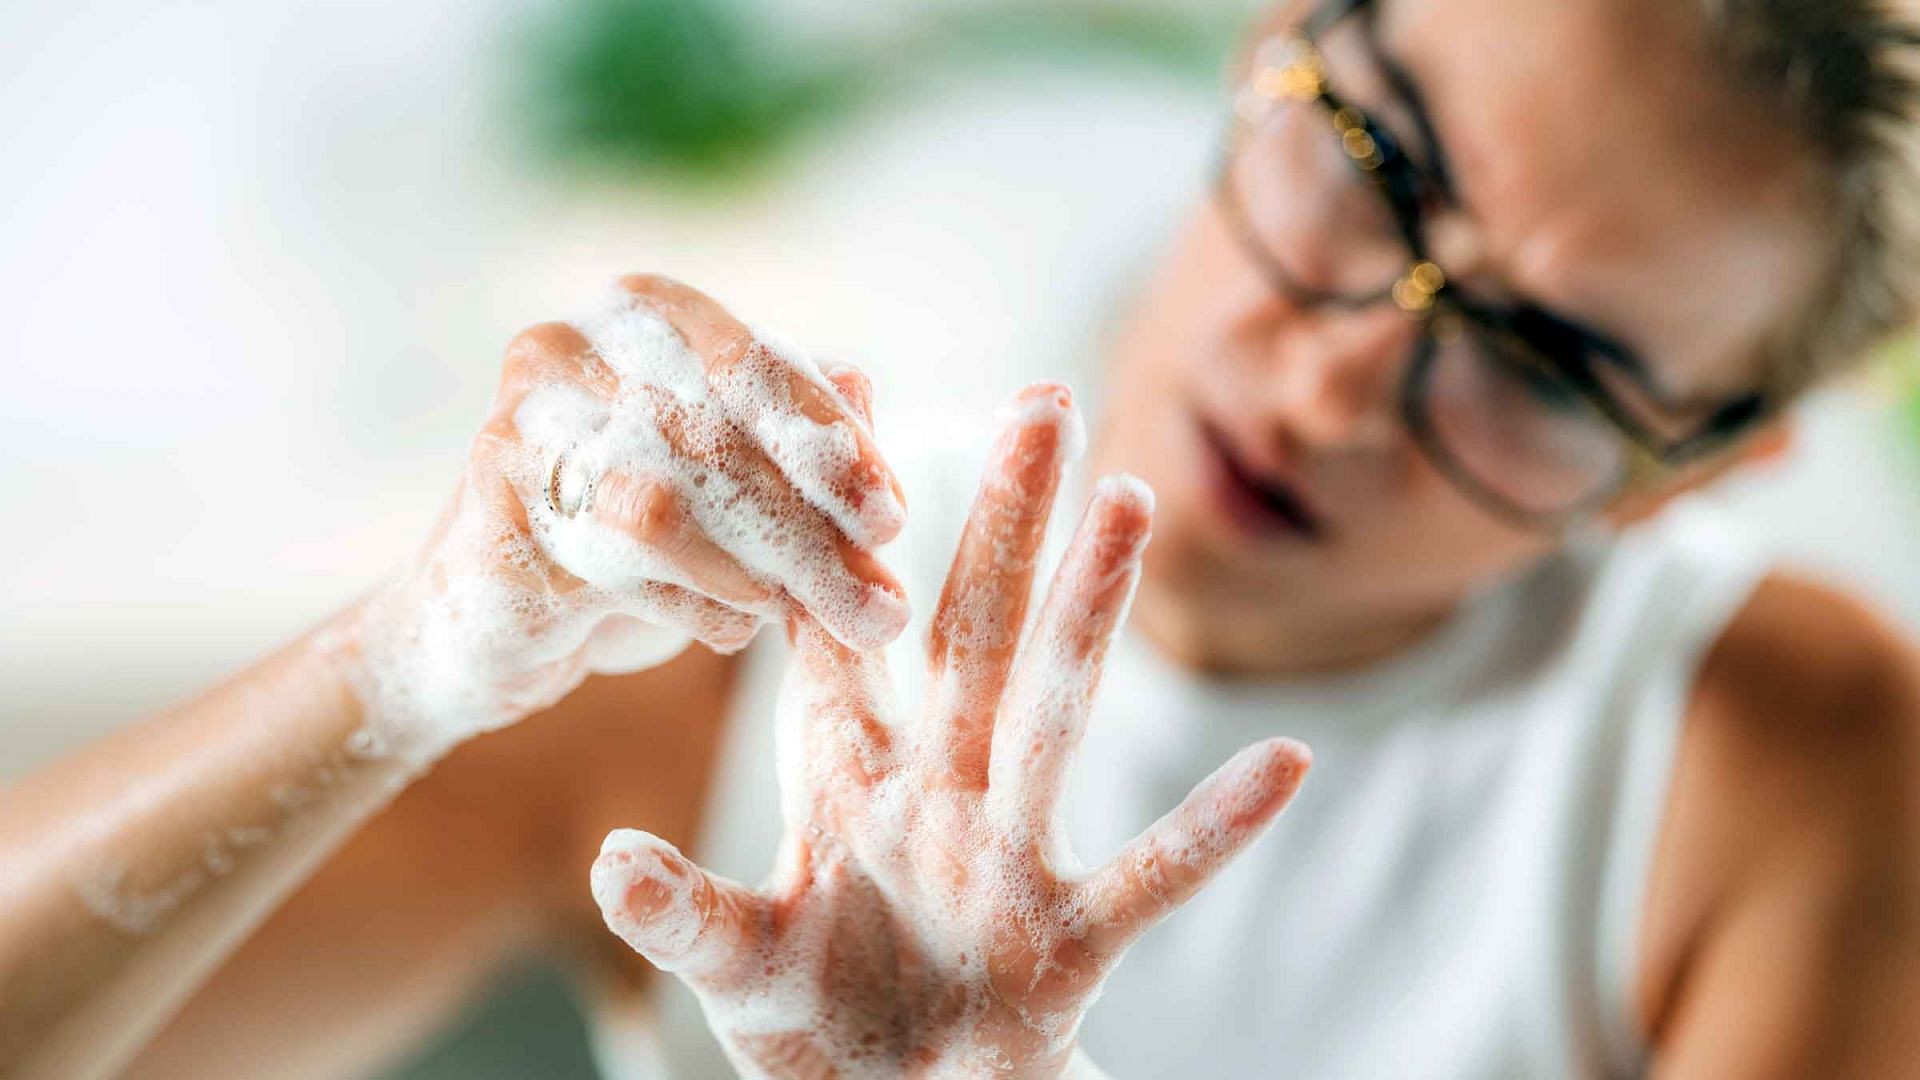 Contamination OCD is not just limited to cleaning behaviors. (Image via Getty/ Getty)